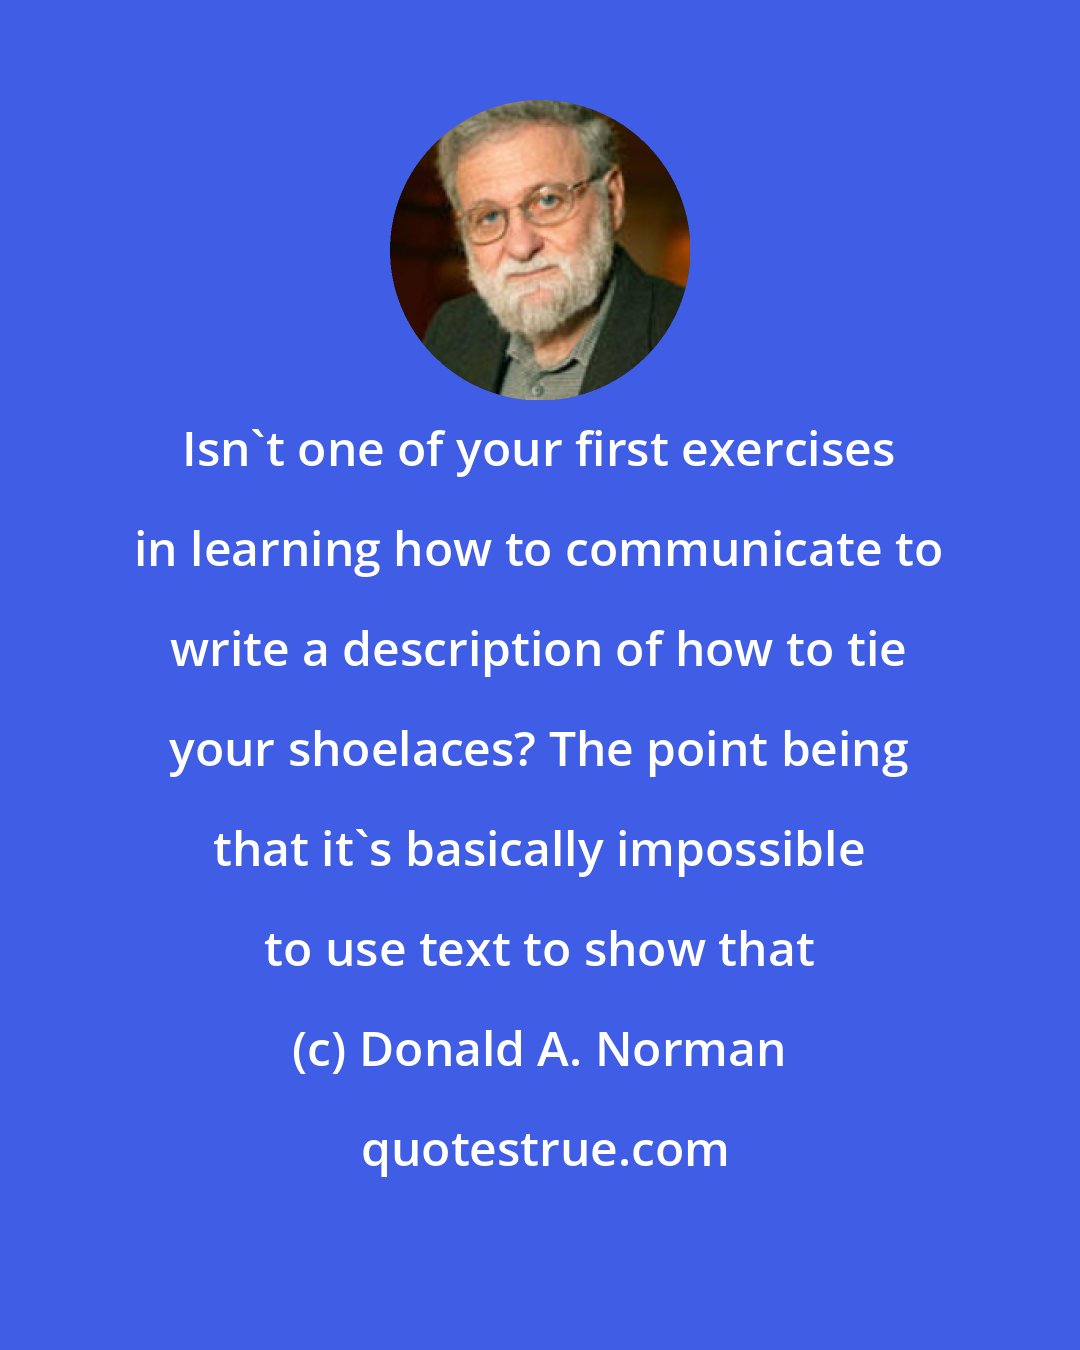 Donald A. Norman: Isn't one of your first exercises in learning how to communicate to write a description of how to tie your shoelaces? The point being that it's basically impossible to use text to show that